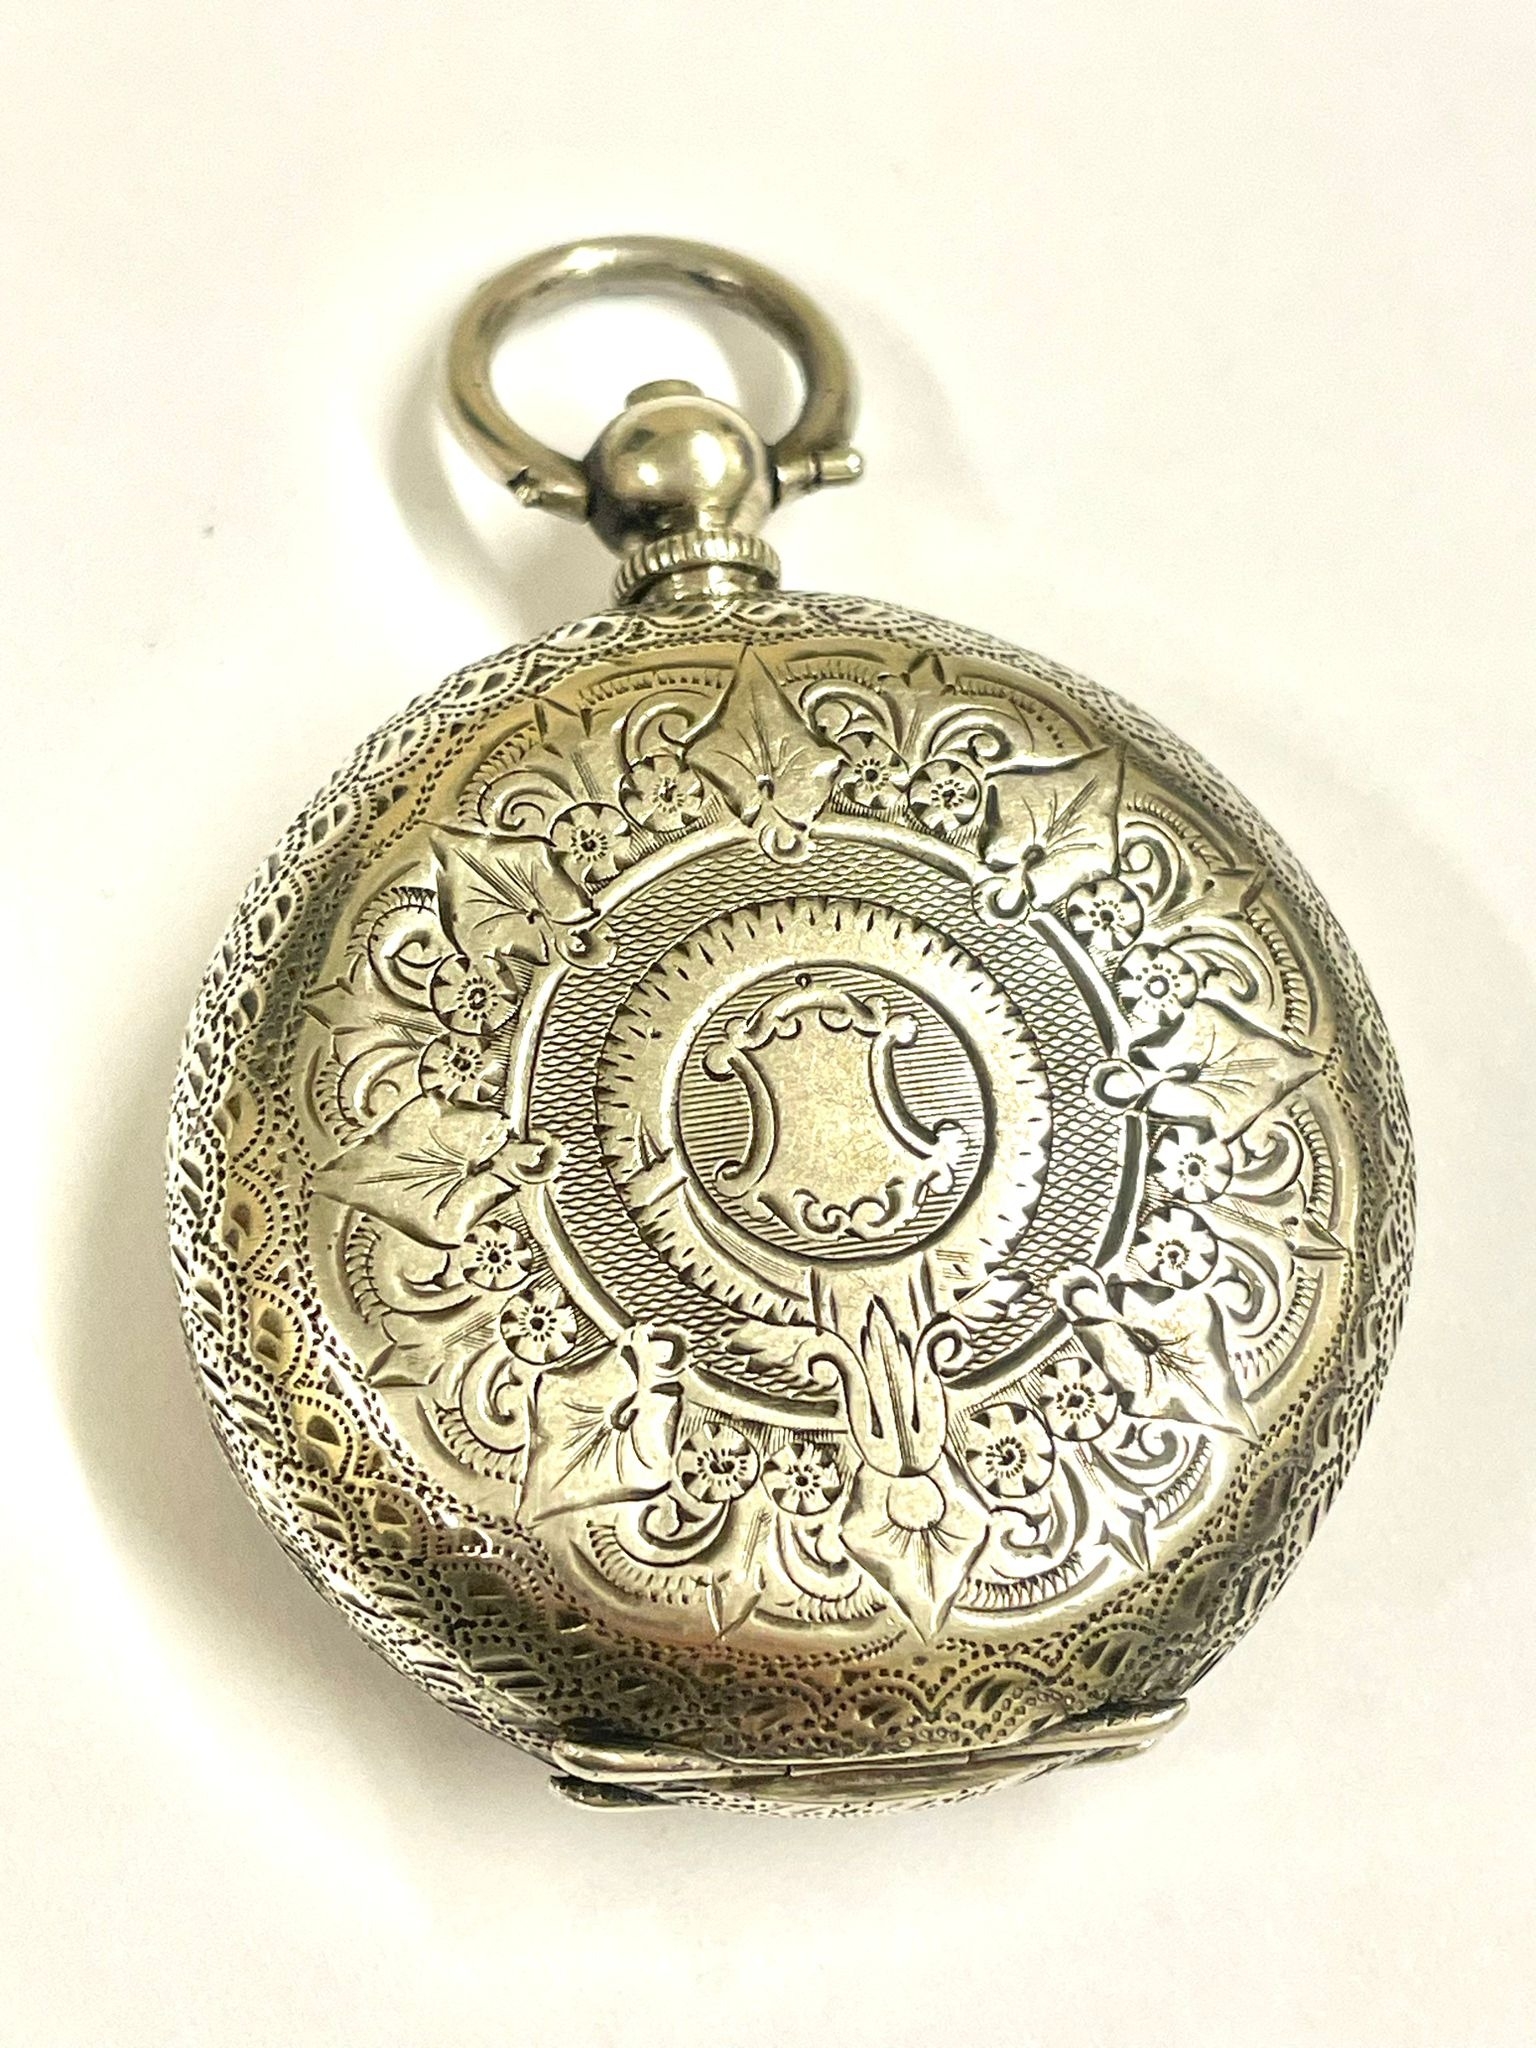 Antique ladies silver pocket watch , ticks sold as found - Image 2 of 2